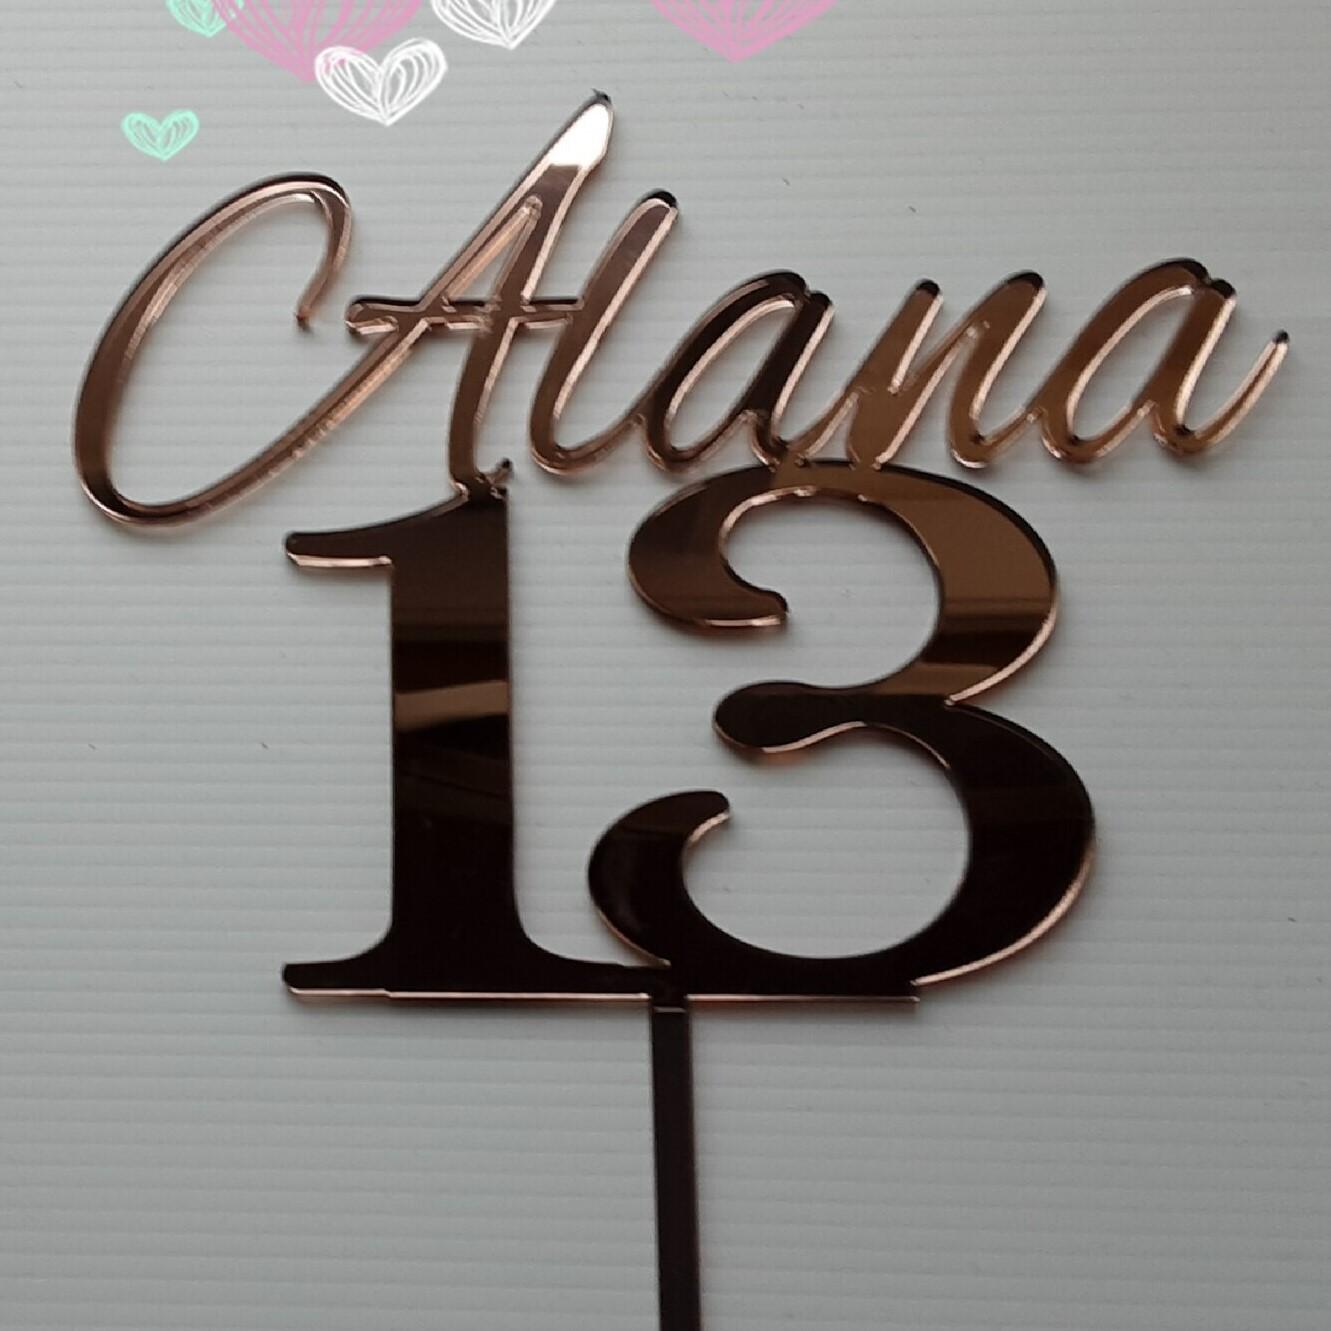 Happy 13th Birthday Cake Topper, Rose Gold 13th Birthday Cake Topper, 13th  Birthday Cake Topper for Girls with Number 13 Candles for Girl 13th  Birthday Party Decorations price in Saudi Arabia |